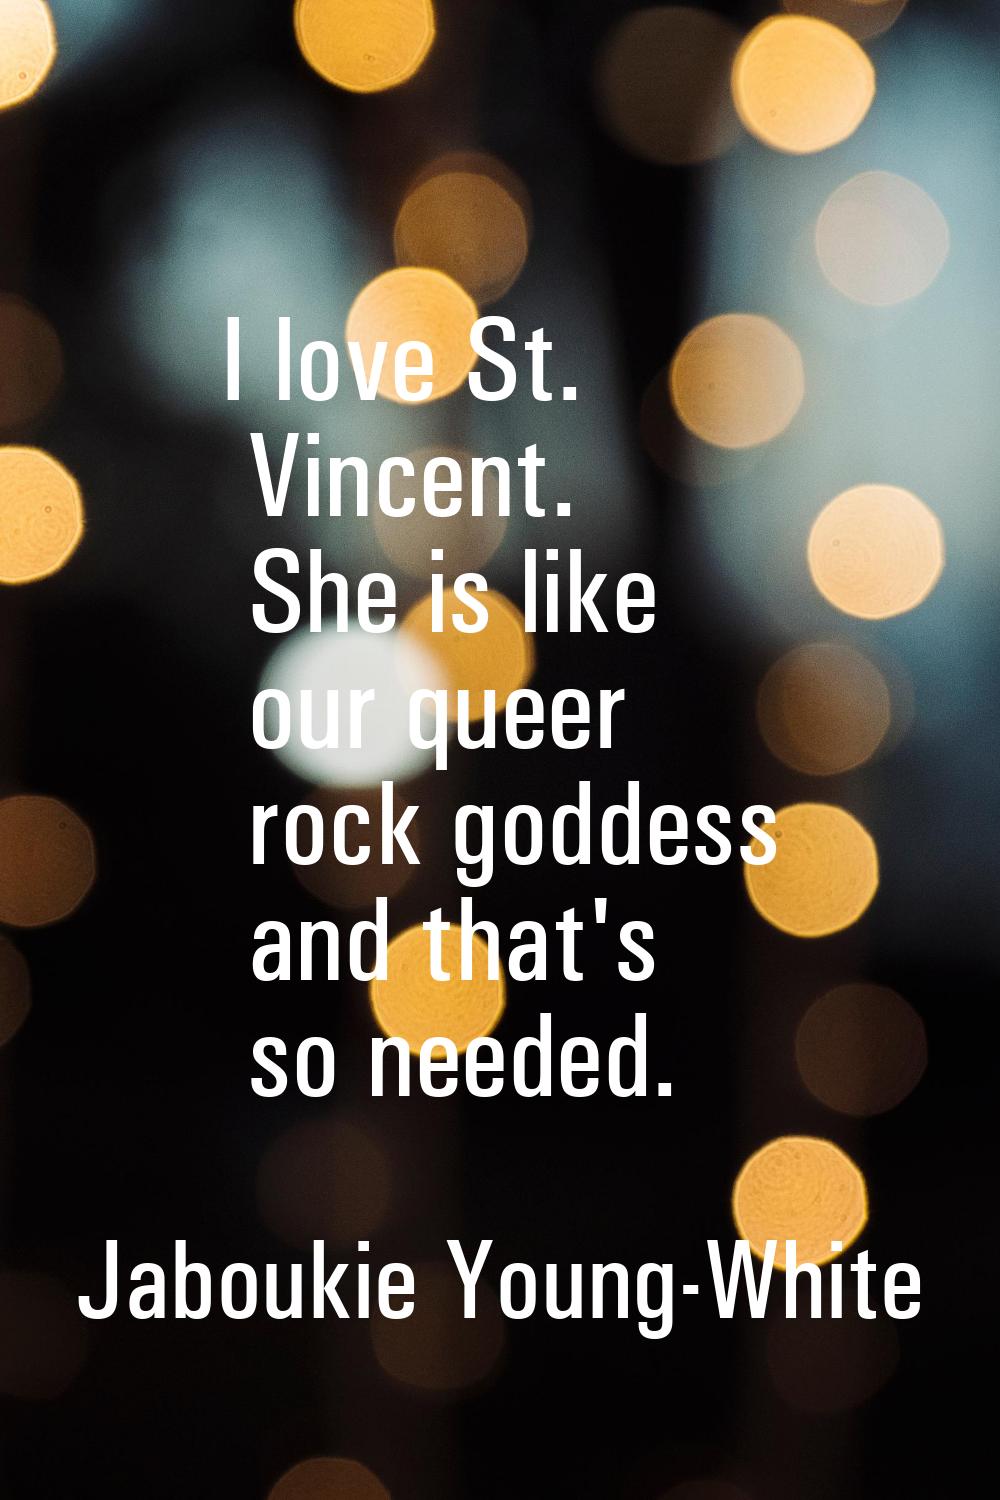 I love St. Vincent. She is like our queer rock goddess and that's so needed.